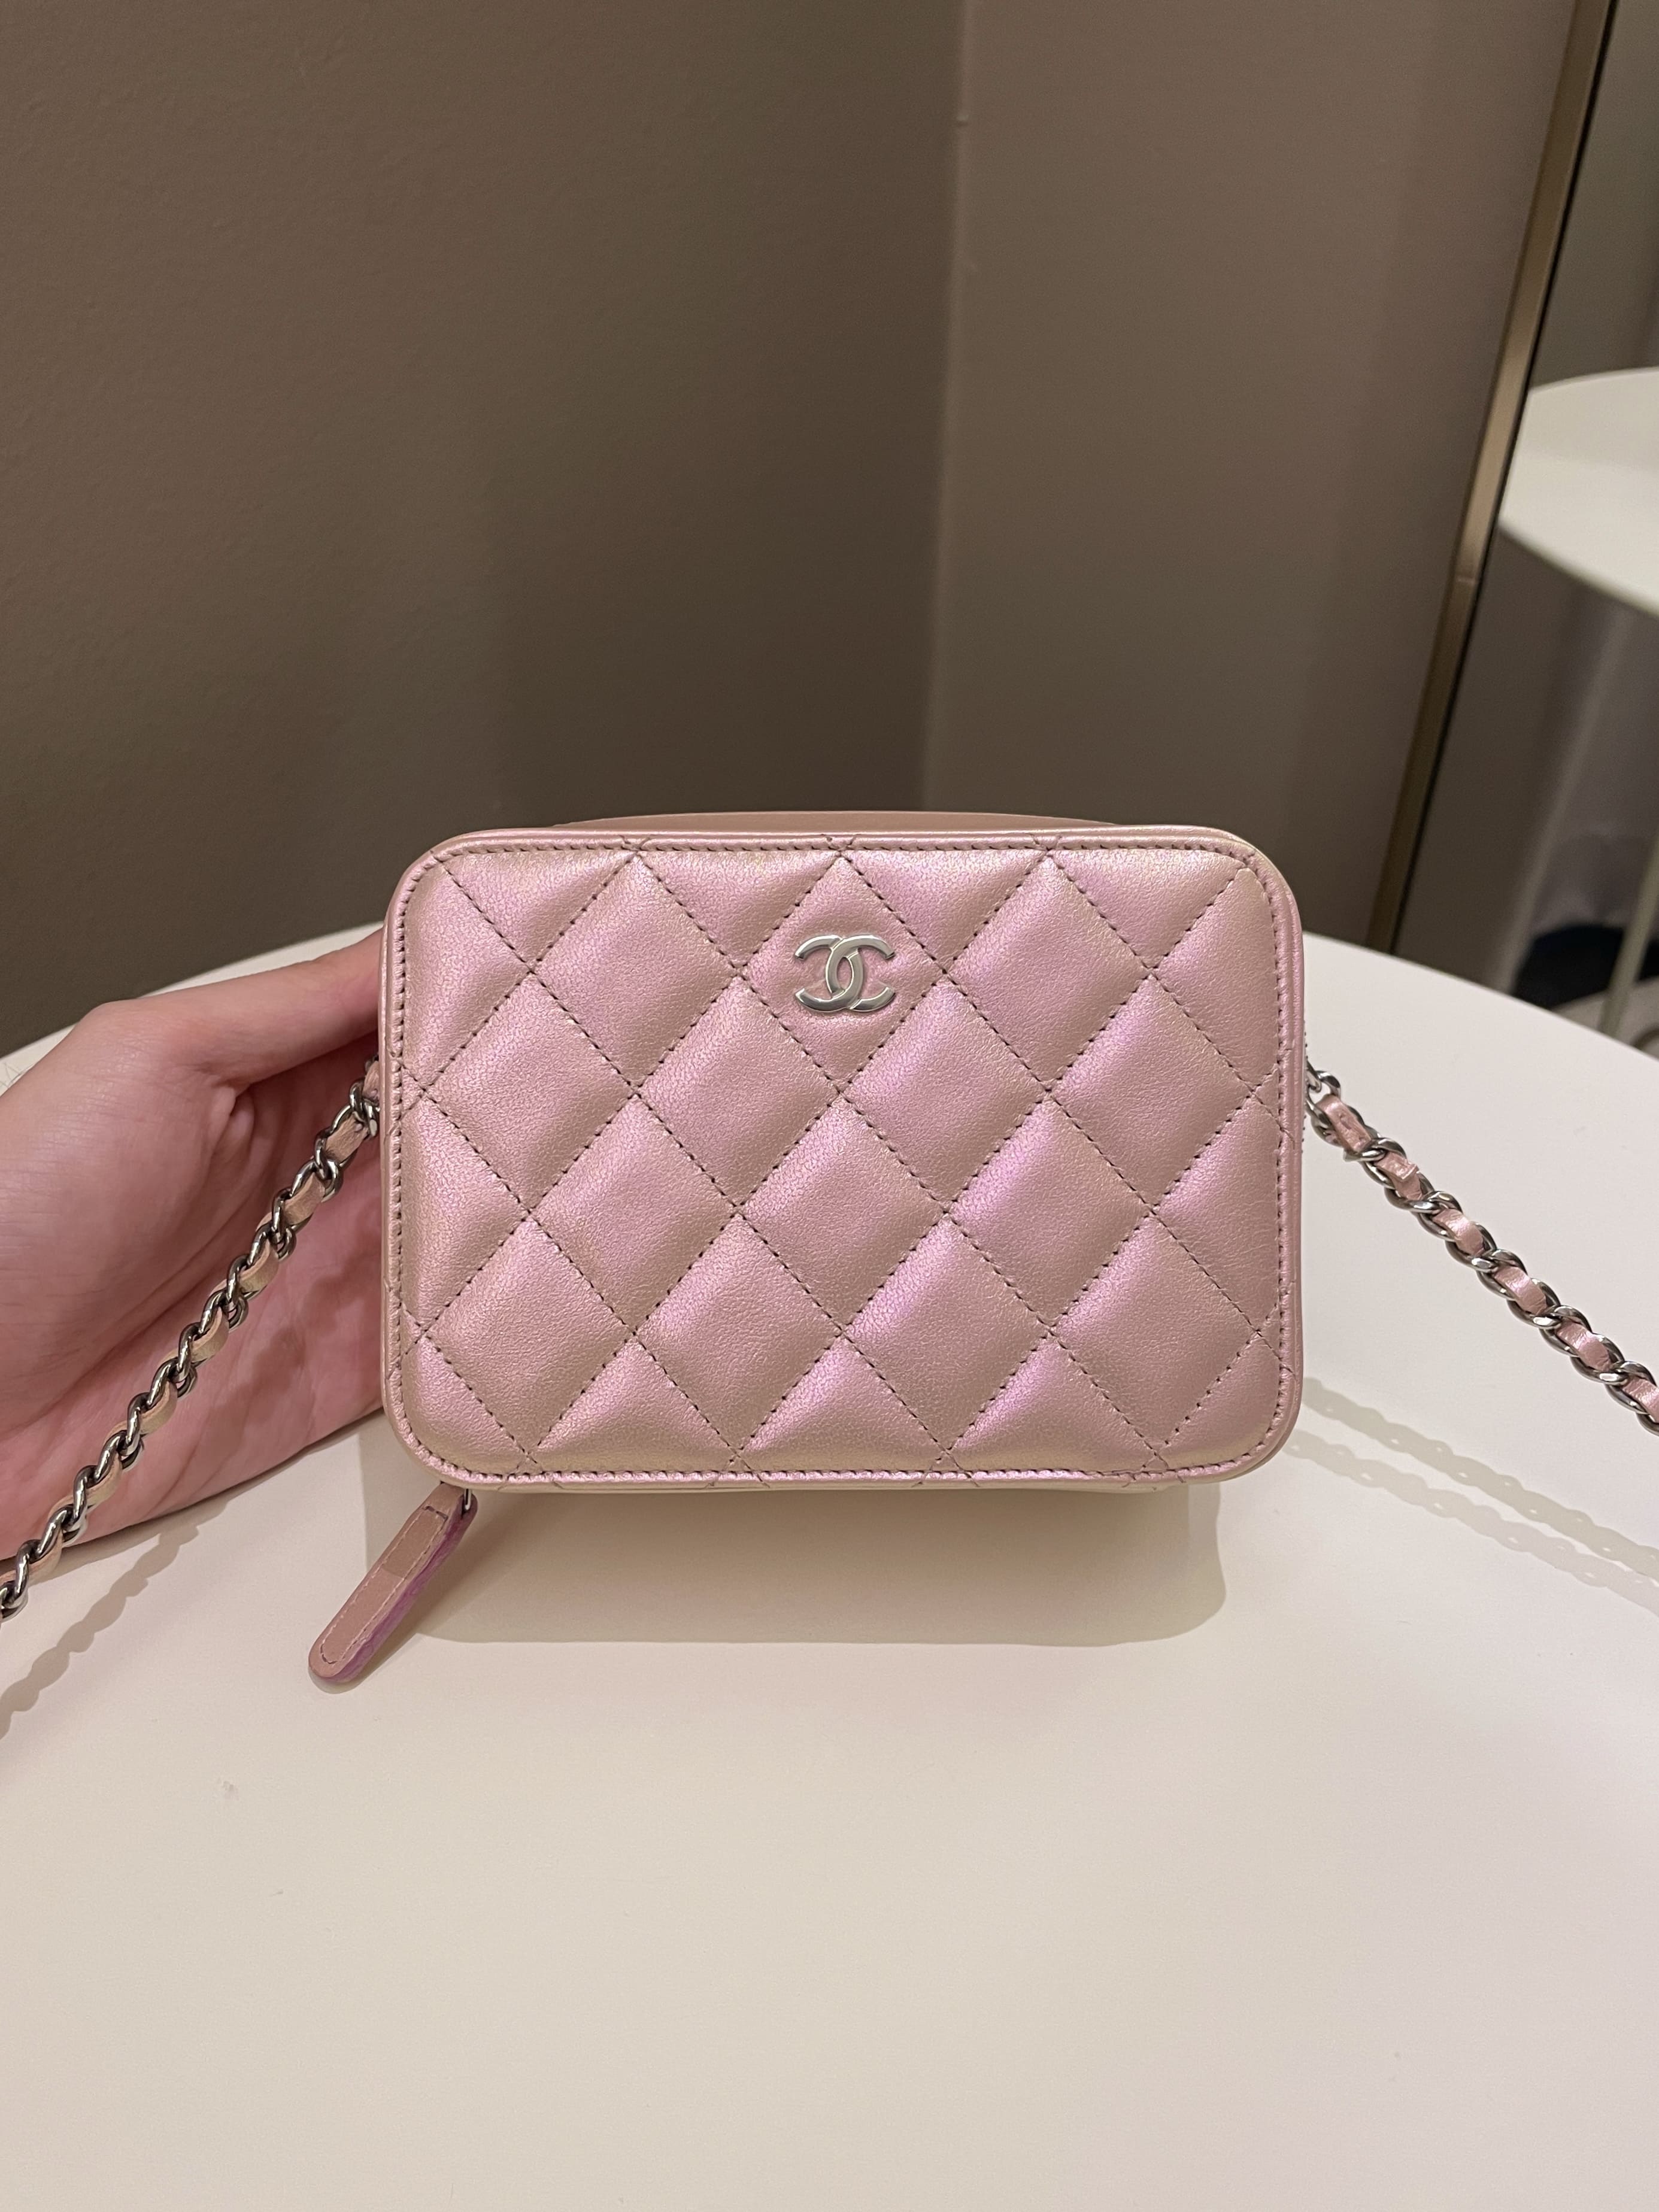 Replica Chanel Grained Calfskin Flap Bag AS3757 AS3777 Coral Pink